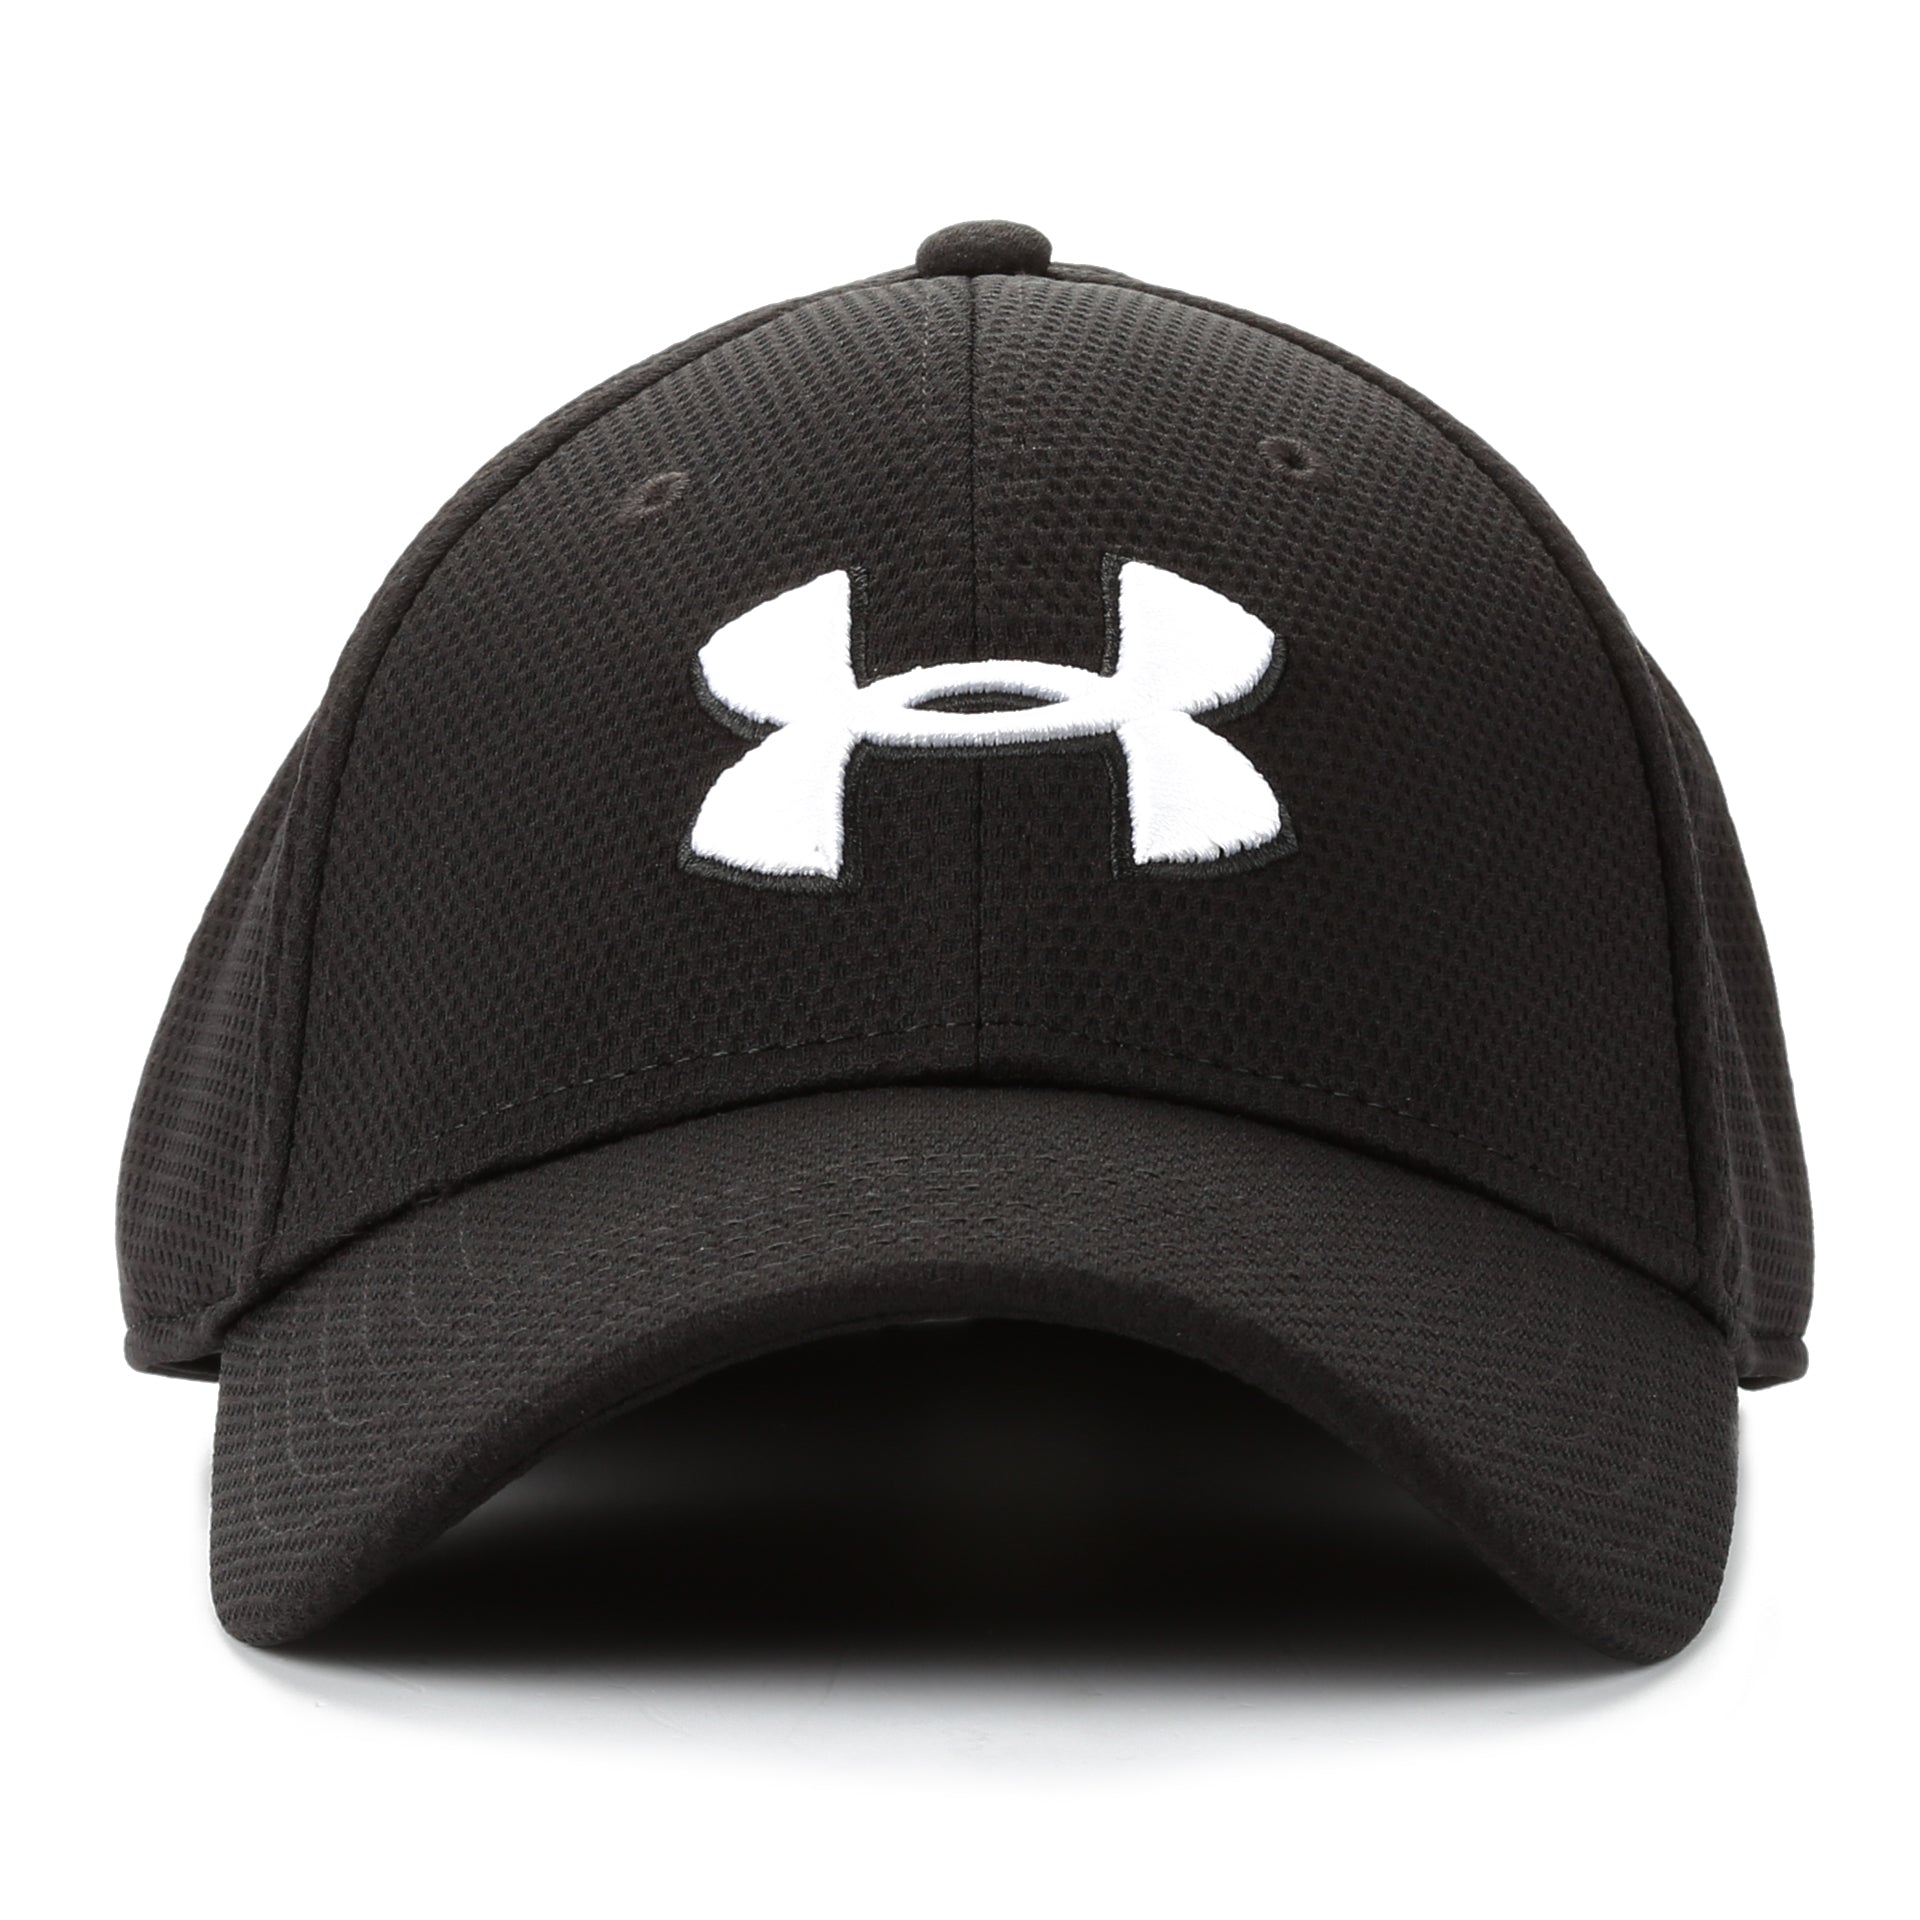 white under armour hats